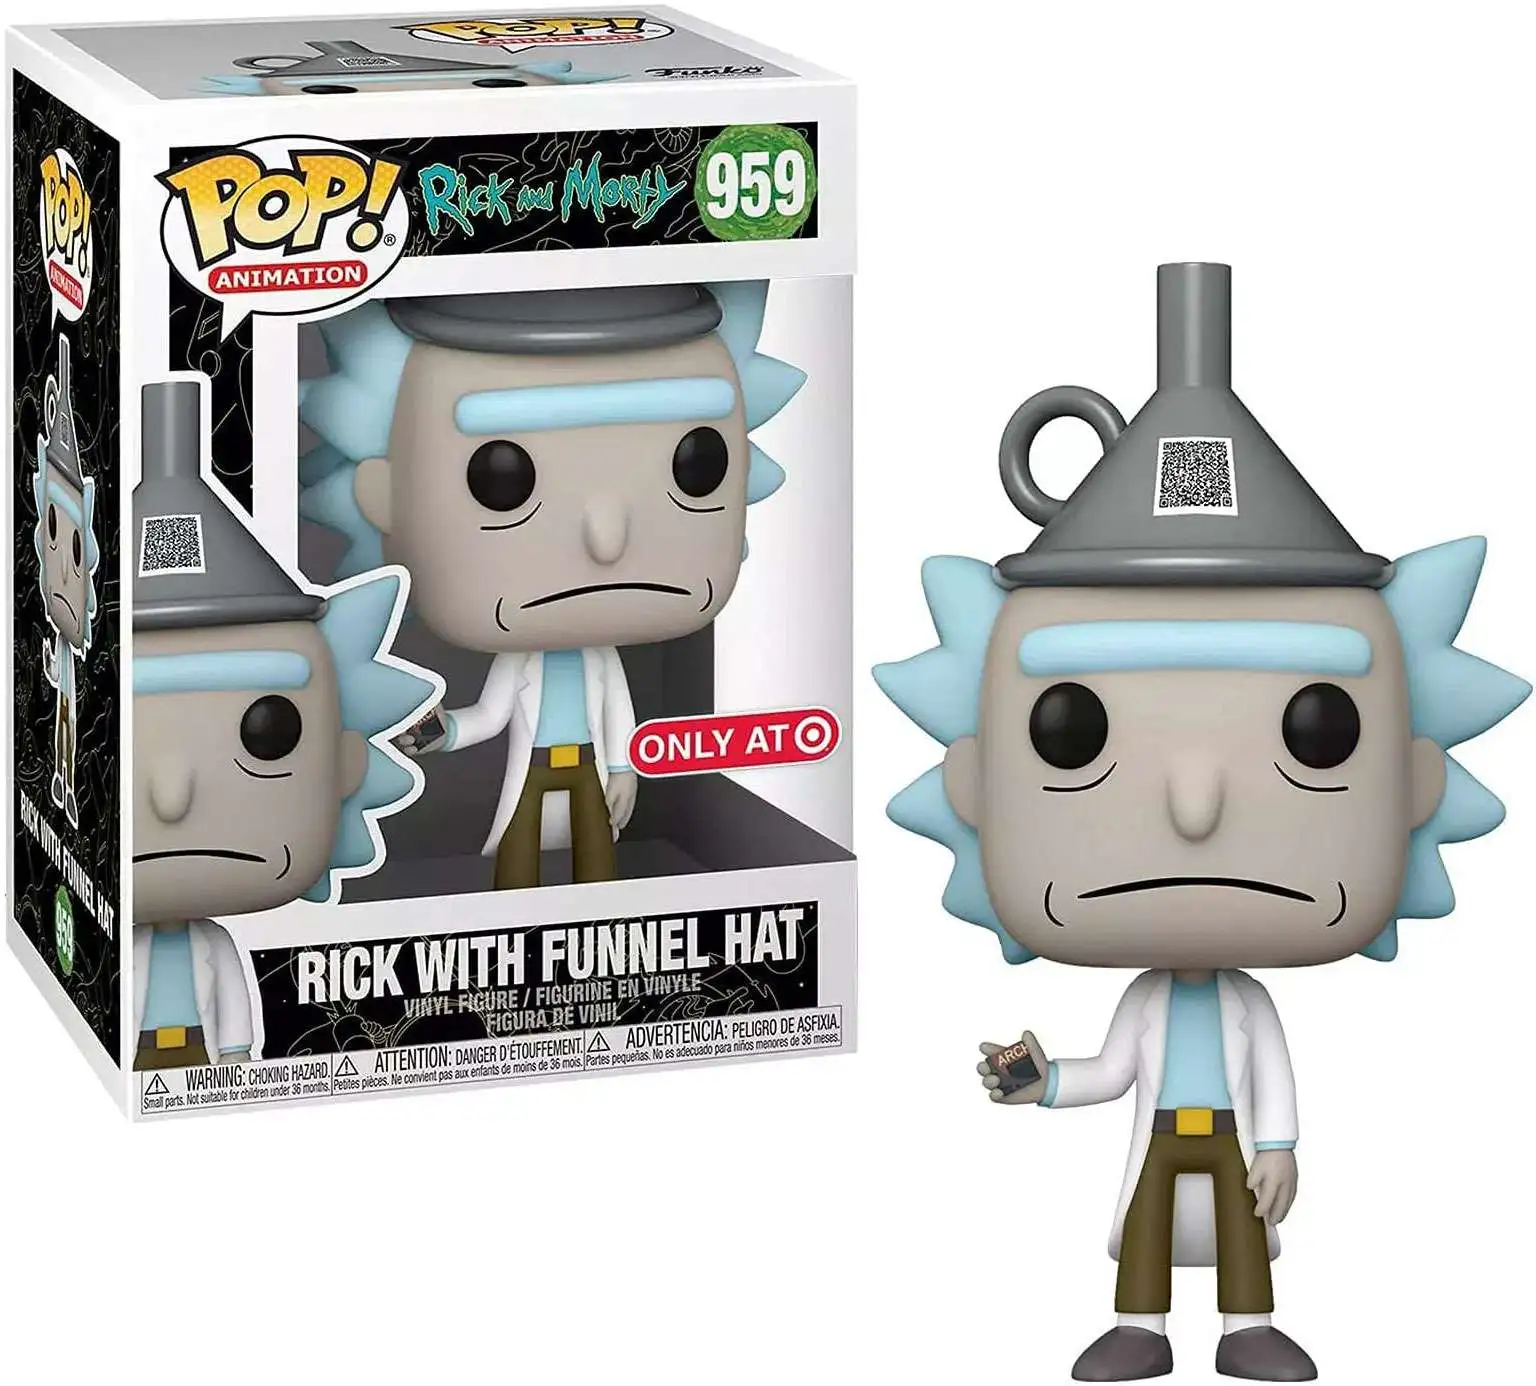 Funko Rick Morty POP Animation Rick with Funnel Hat Exclusive Vinyl Figure  959 - ToyWiz